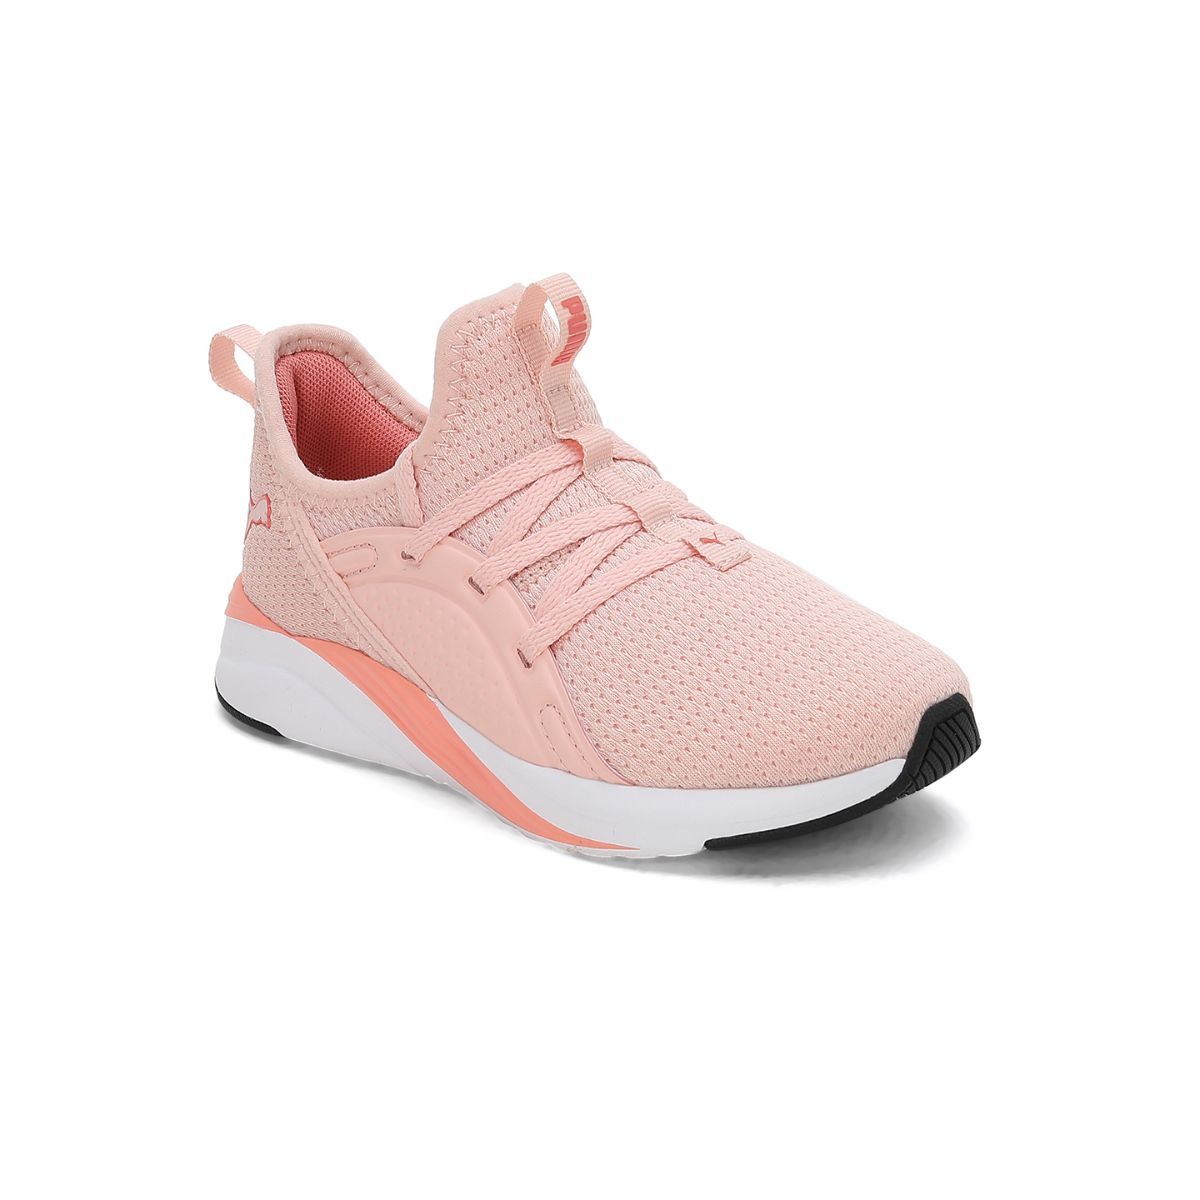 Soft Sophia 2 Pre Girls Pink Casual Shoes: Buy Puma Soft Sophia 2 Pre School Girls Casual Shoes Online at Best Price in India Nykaa